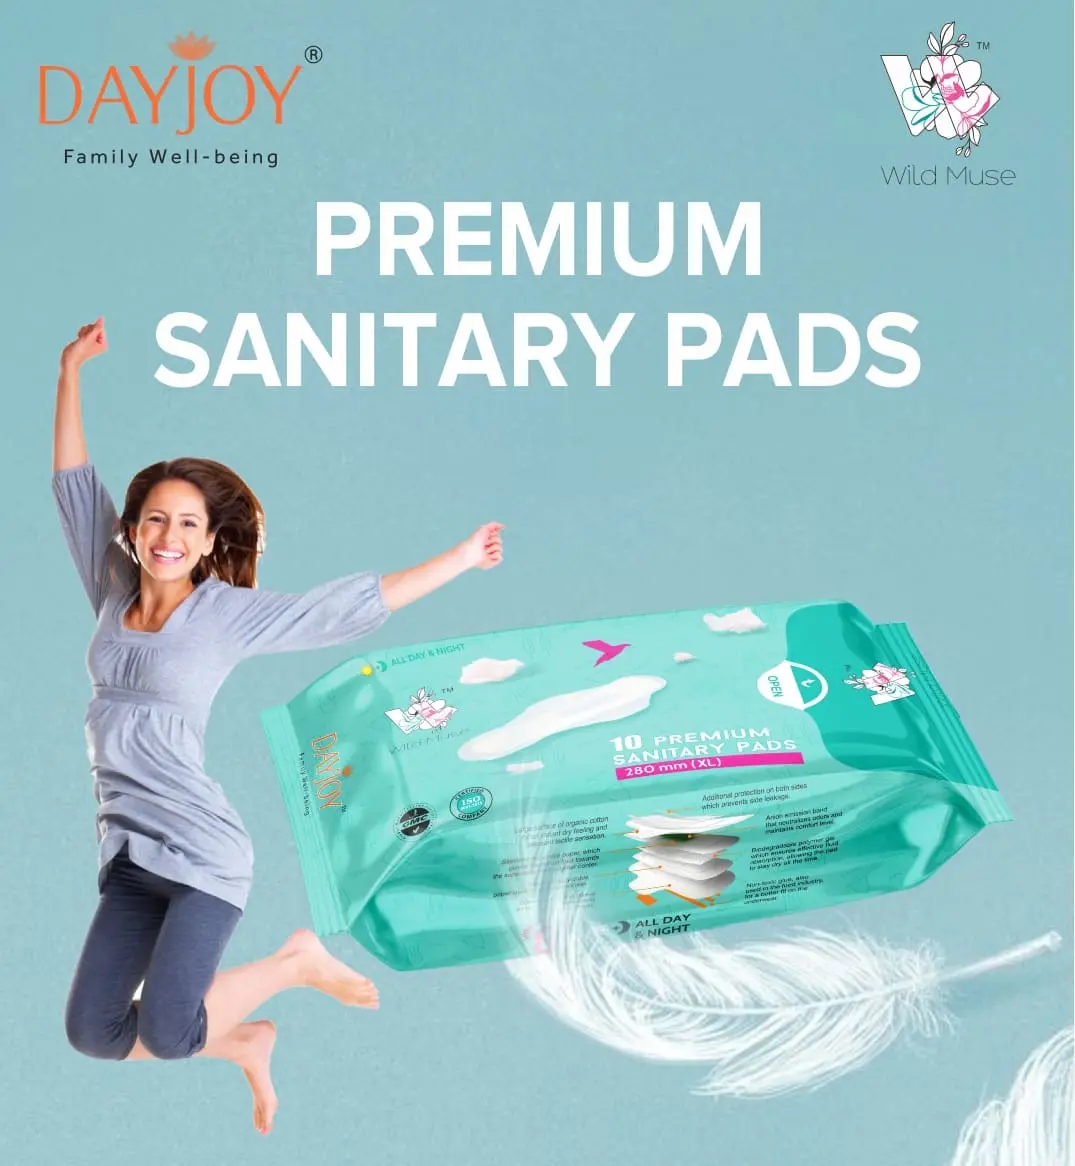 Wild Muse Sanitary Pads- Best pads for periods